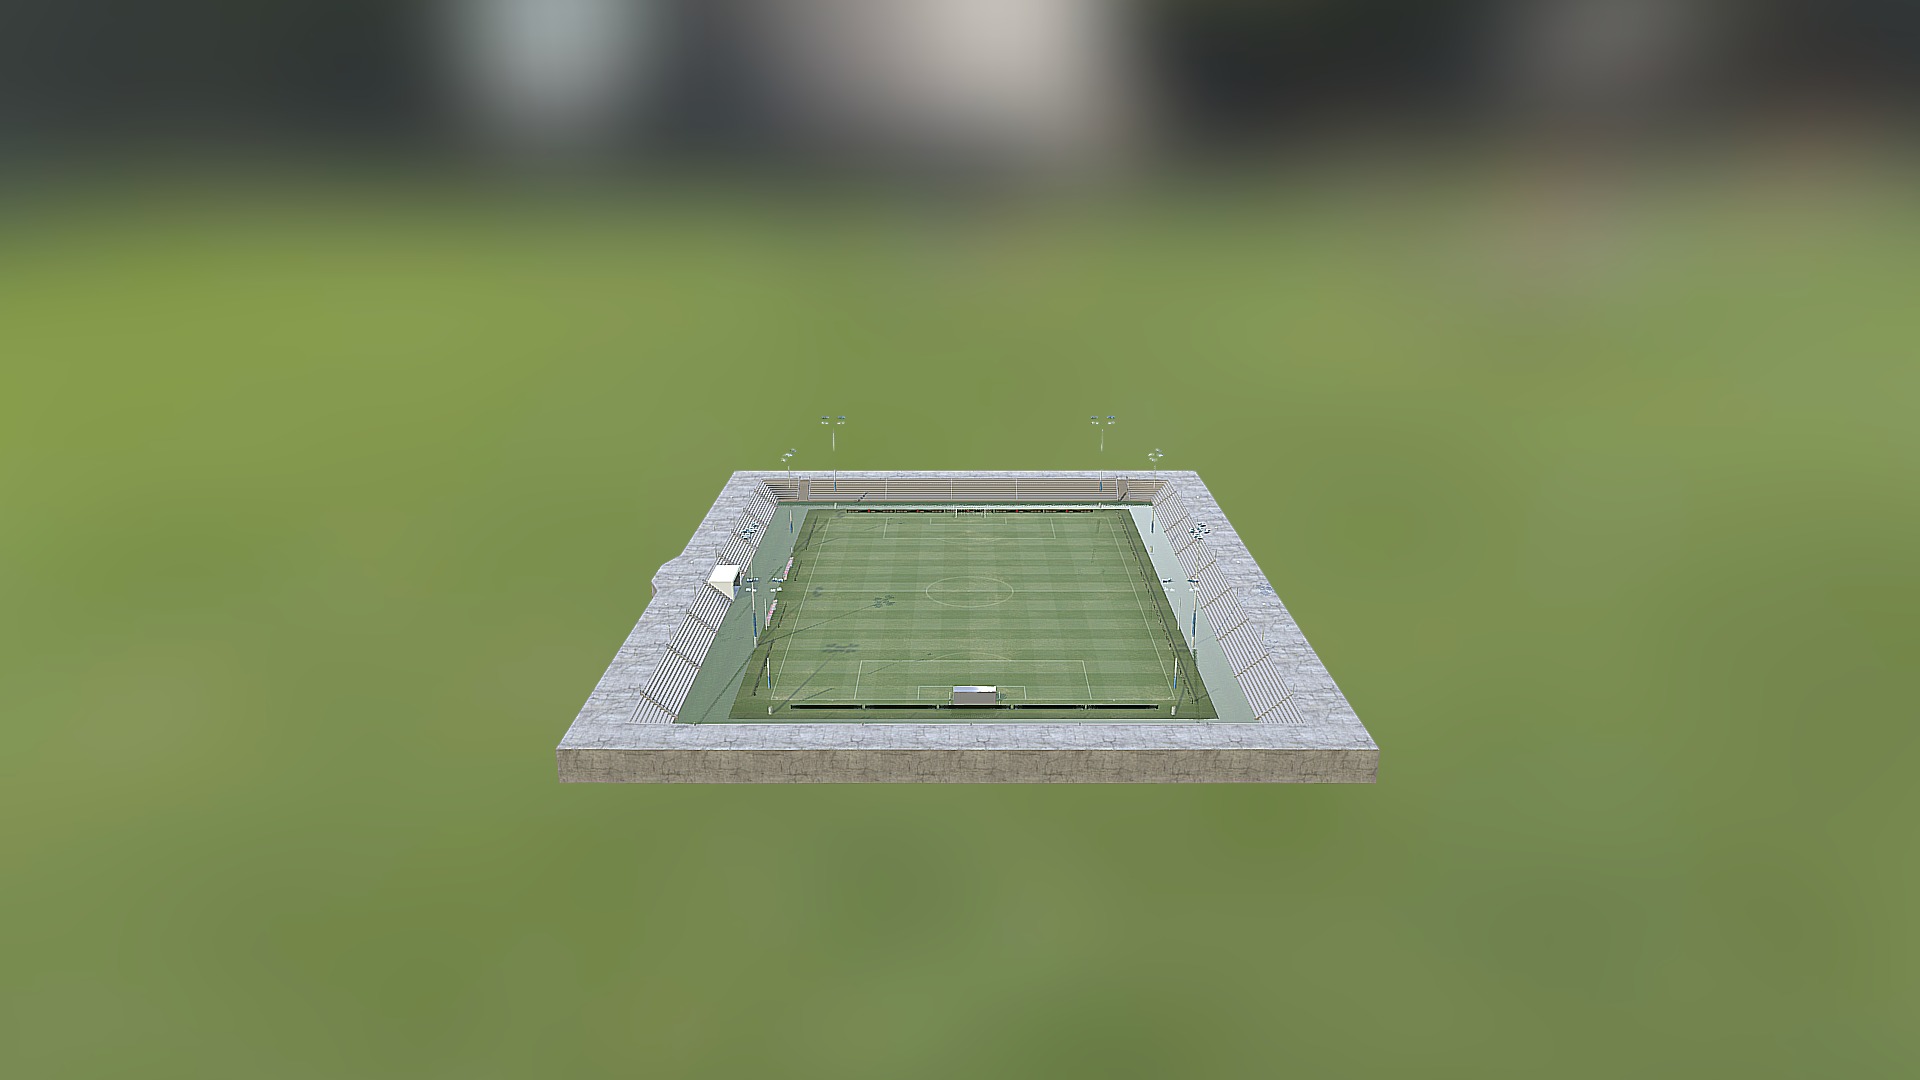 3D model Soccer Stadium - This is a 3D model of the Soccer Stadium. The 3D model is about a computer chip on a green surface.